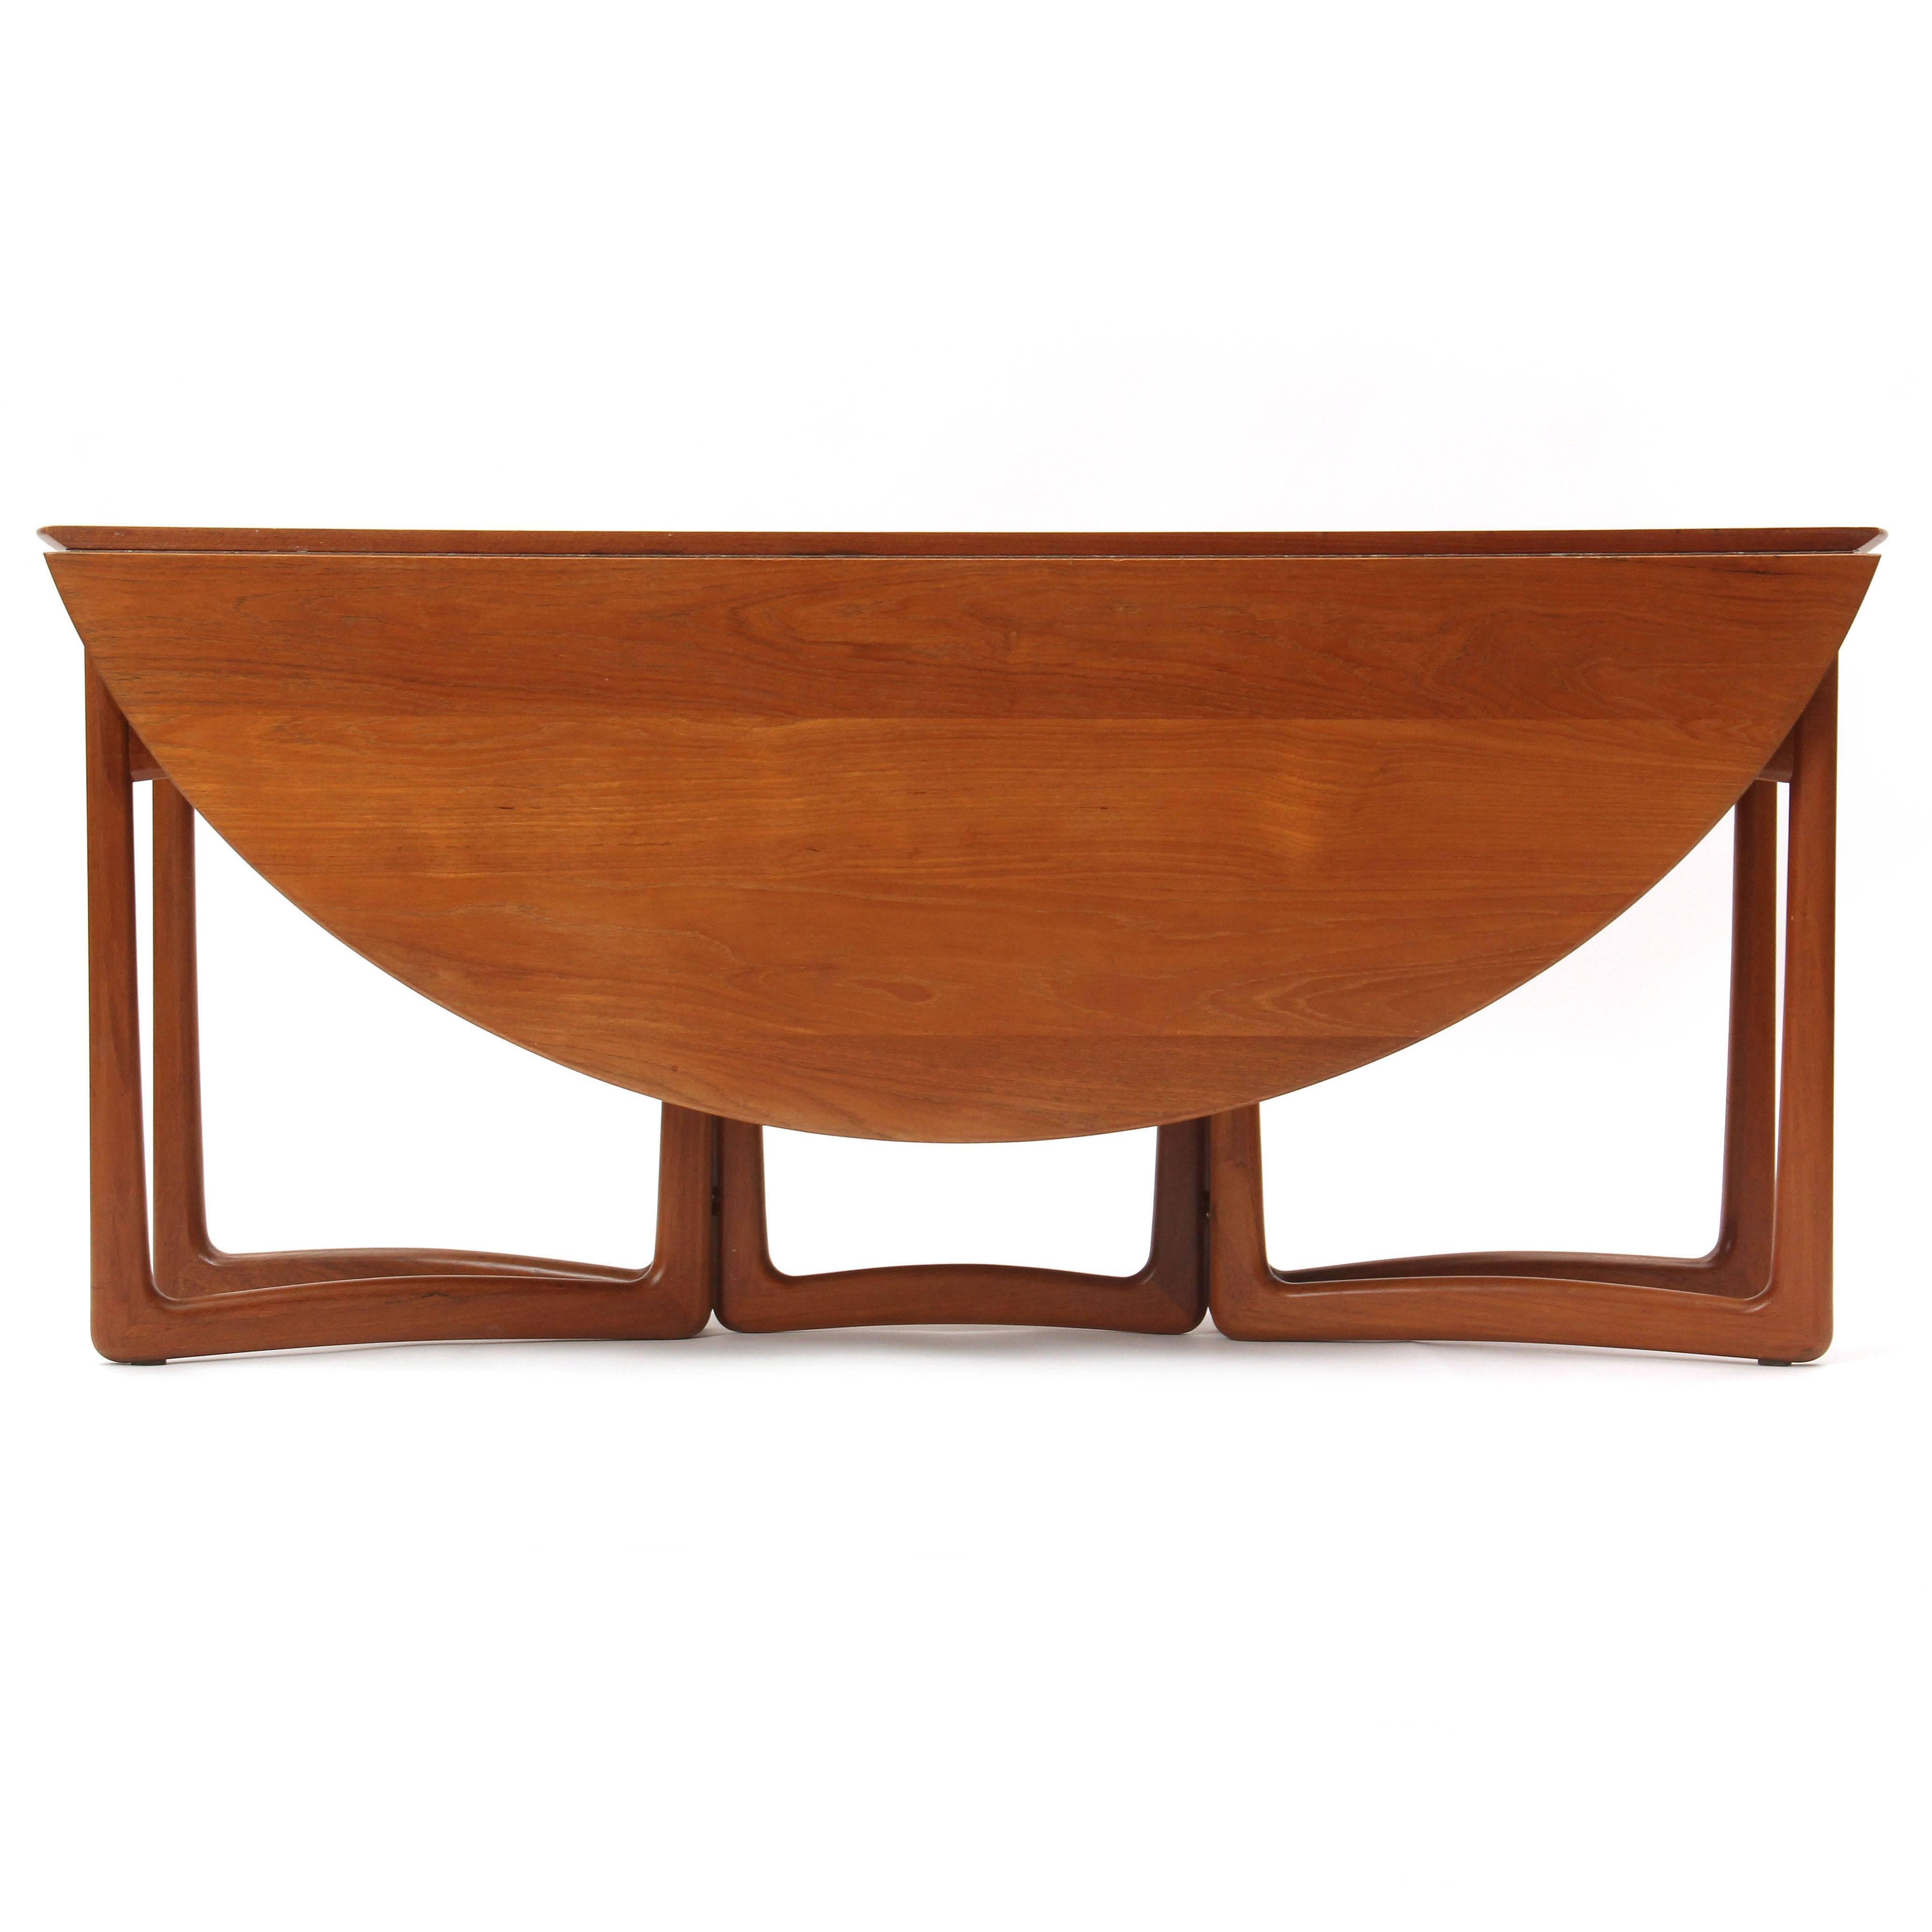 Mid-20th Century Drop-Leaf Table by Peter Hvidt and Orla Mølgaard-Nielsen For Sale